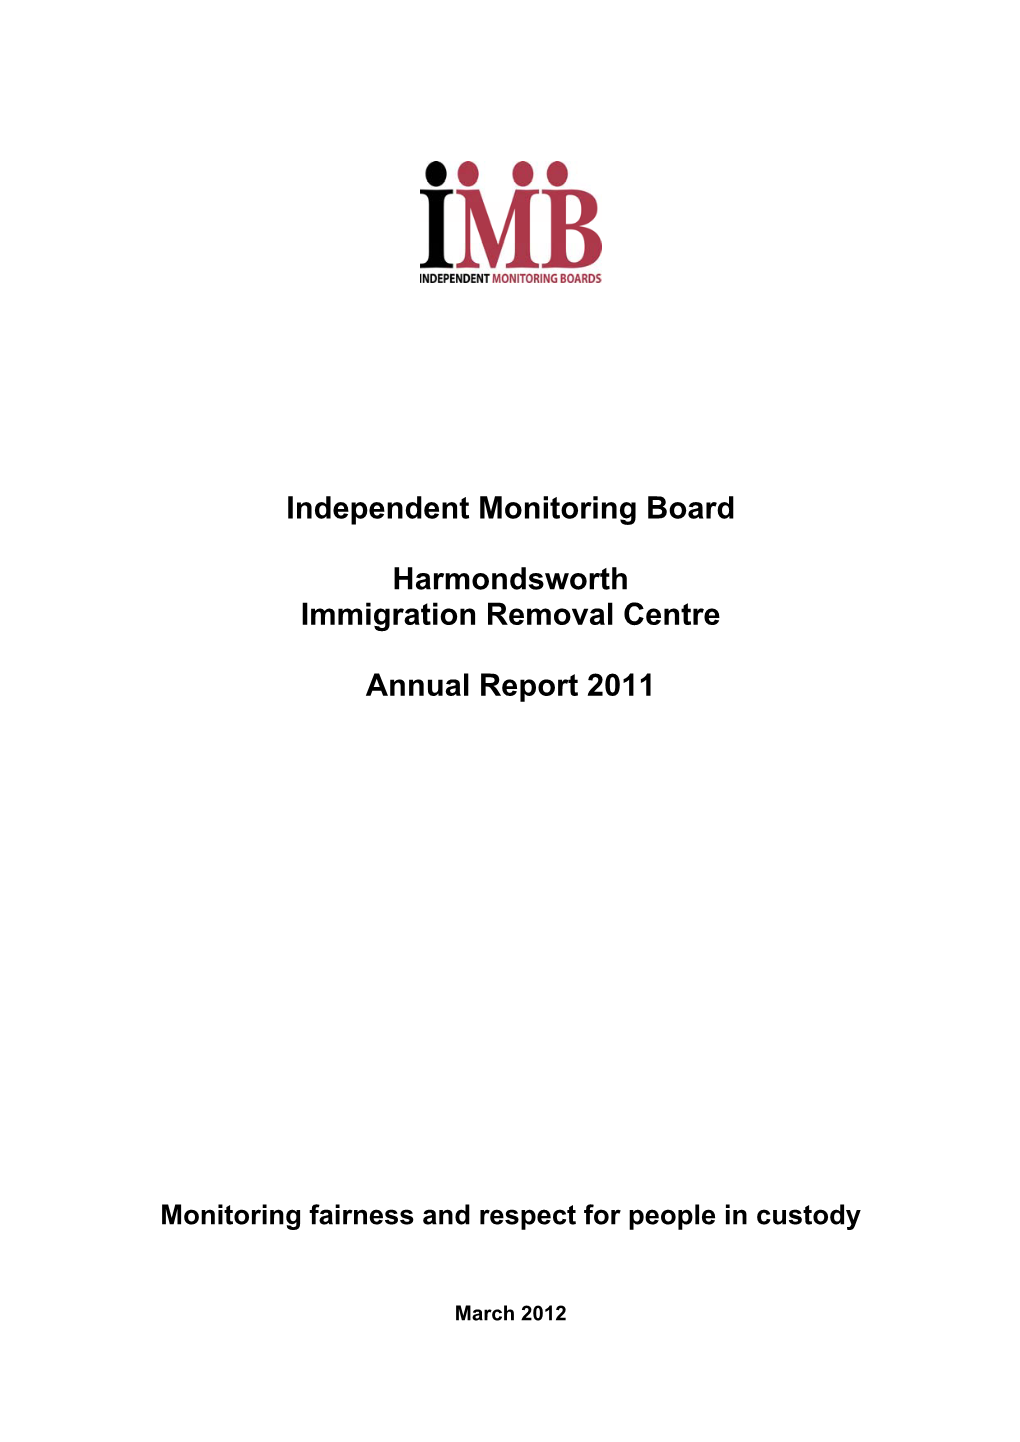 Independent Monitoring Board Annual Report Harmondsworth